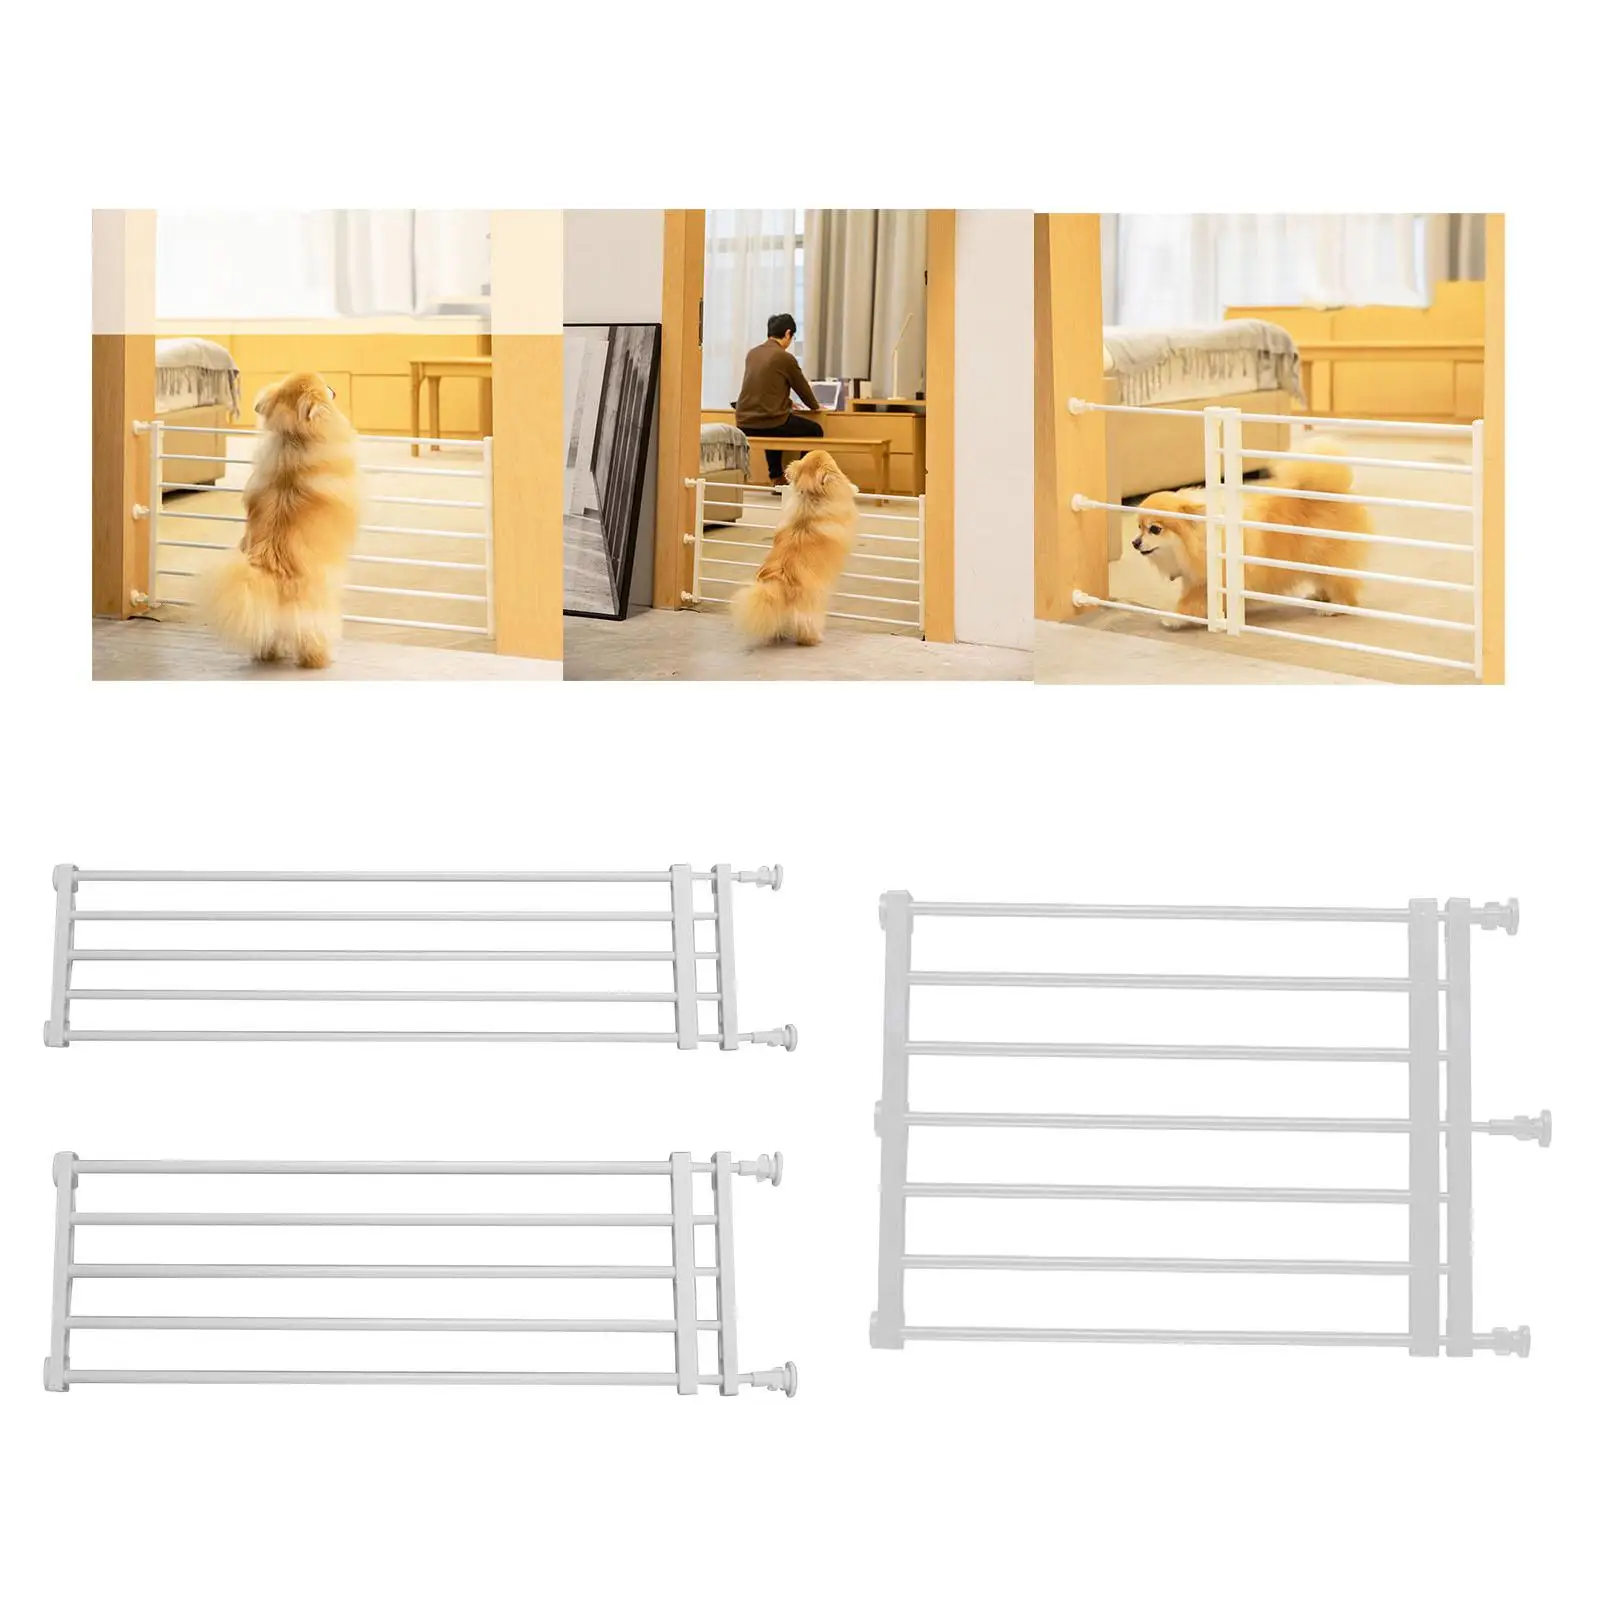 Portable Retractable Pet Dog Gate Screen Door Child Fence Baby Barrier Protection for Cat Small Medium Patio Indoor